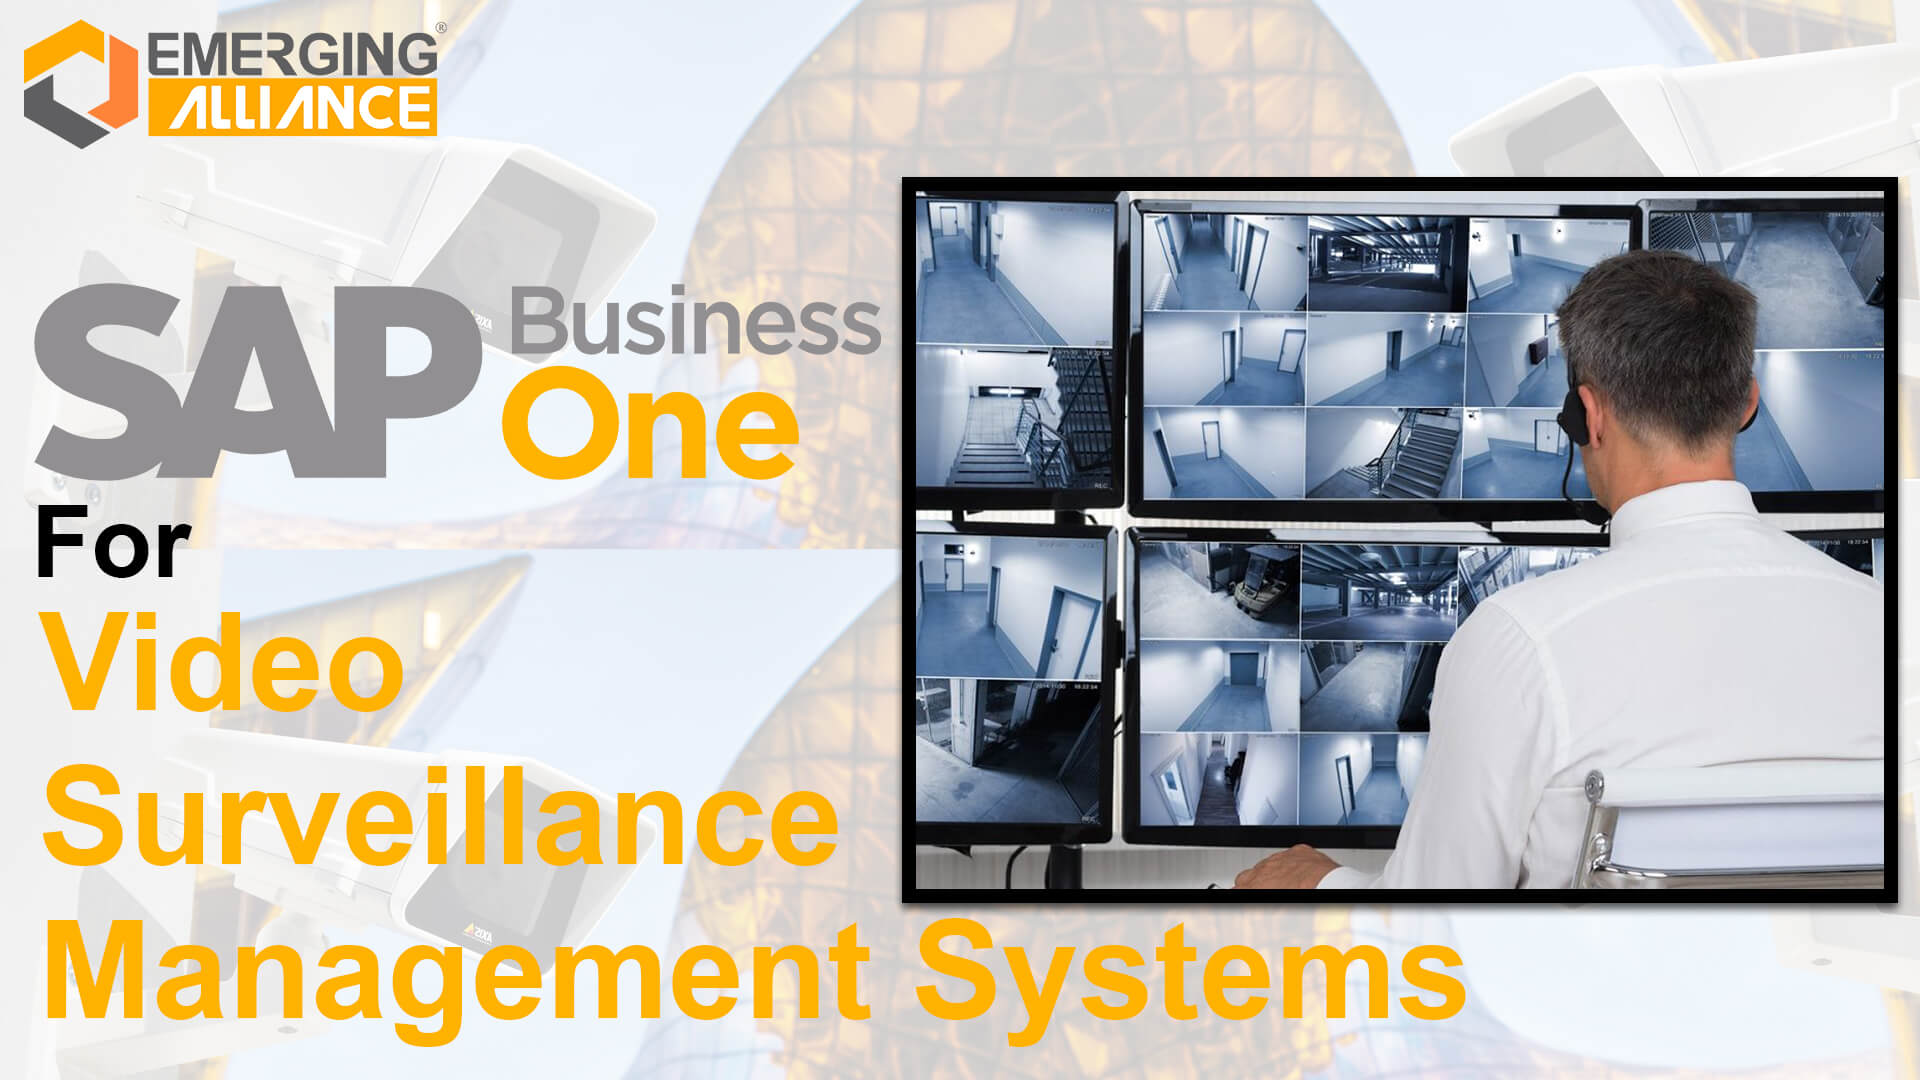 sap business one for video surveillance management systems